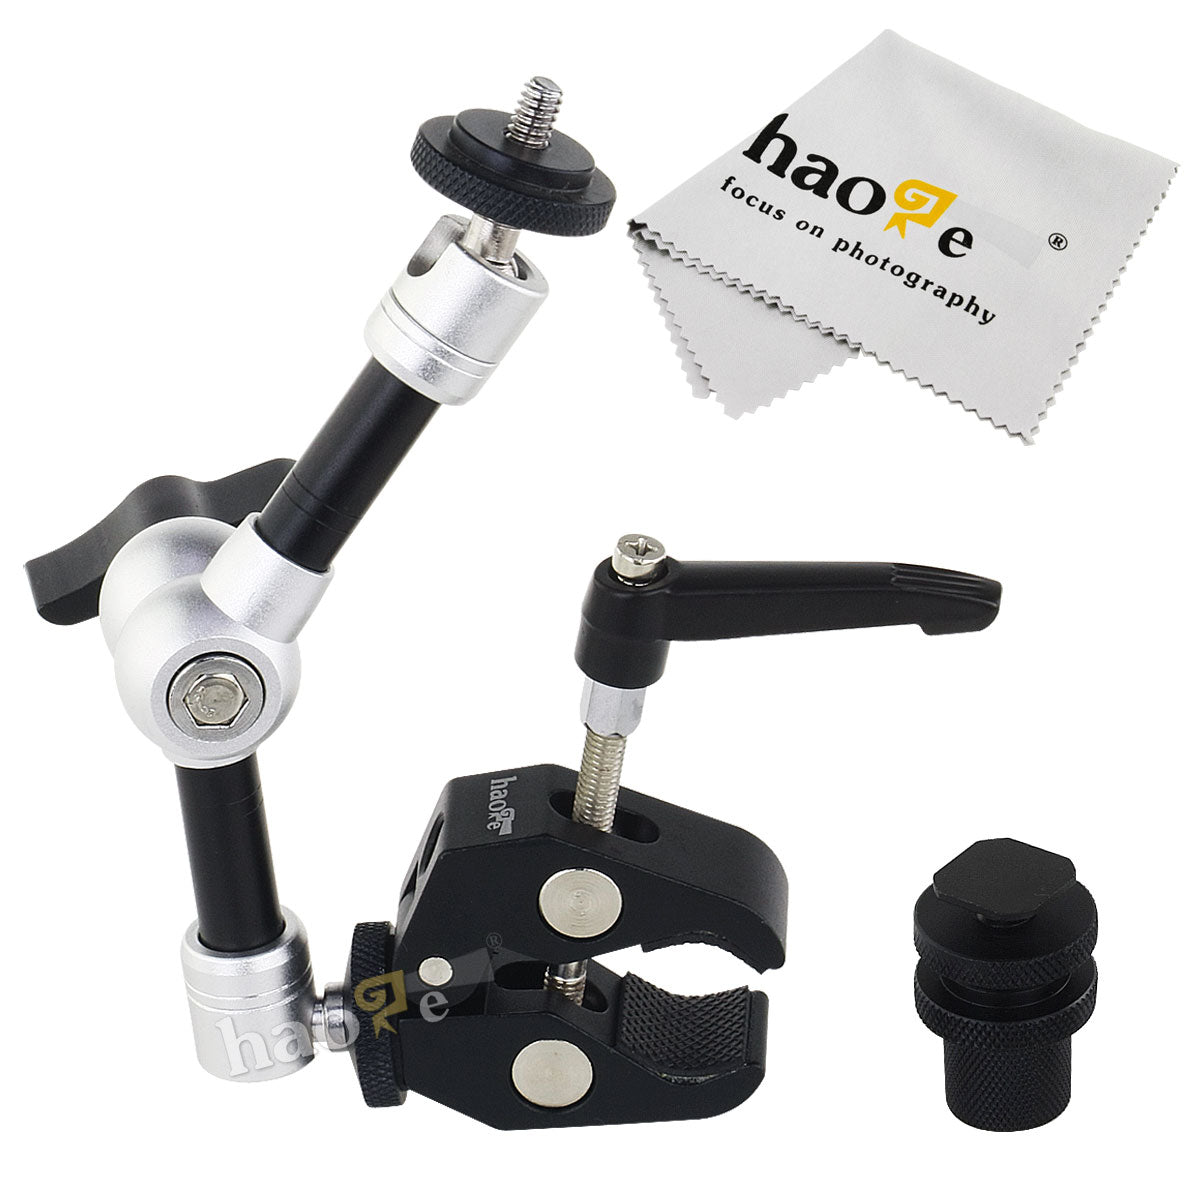 Haoge 7 inch Articulating Friction Magic Arm with Small Clamp Crab Pliers Clip for HDMI LCD Monitor LED Light DSLR Camera Video Tripod